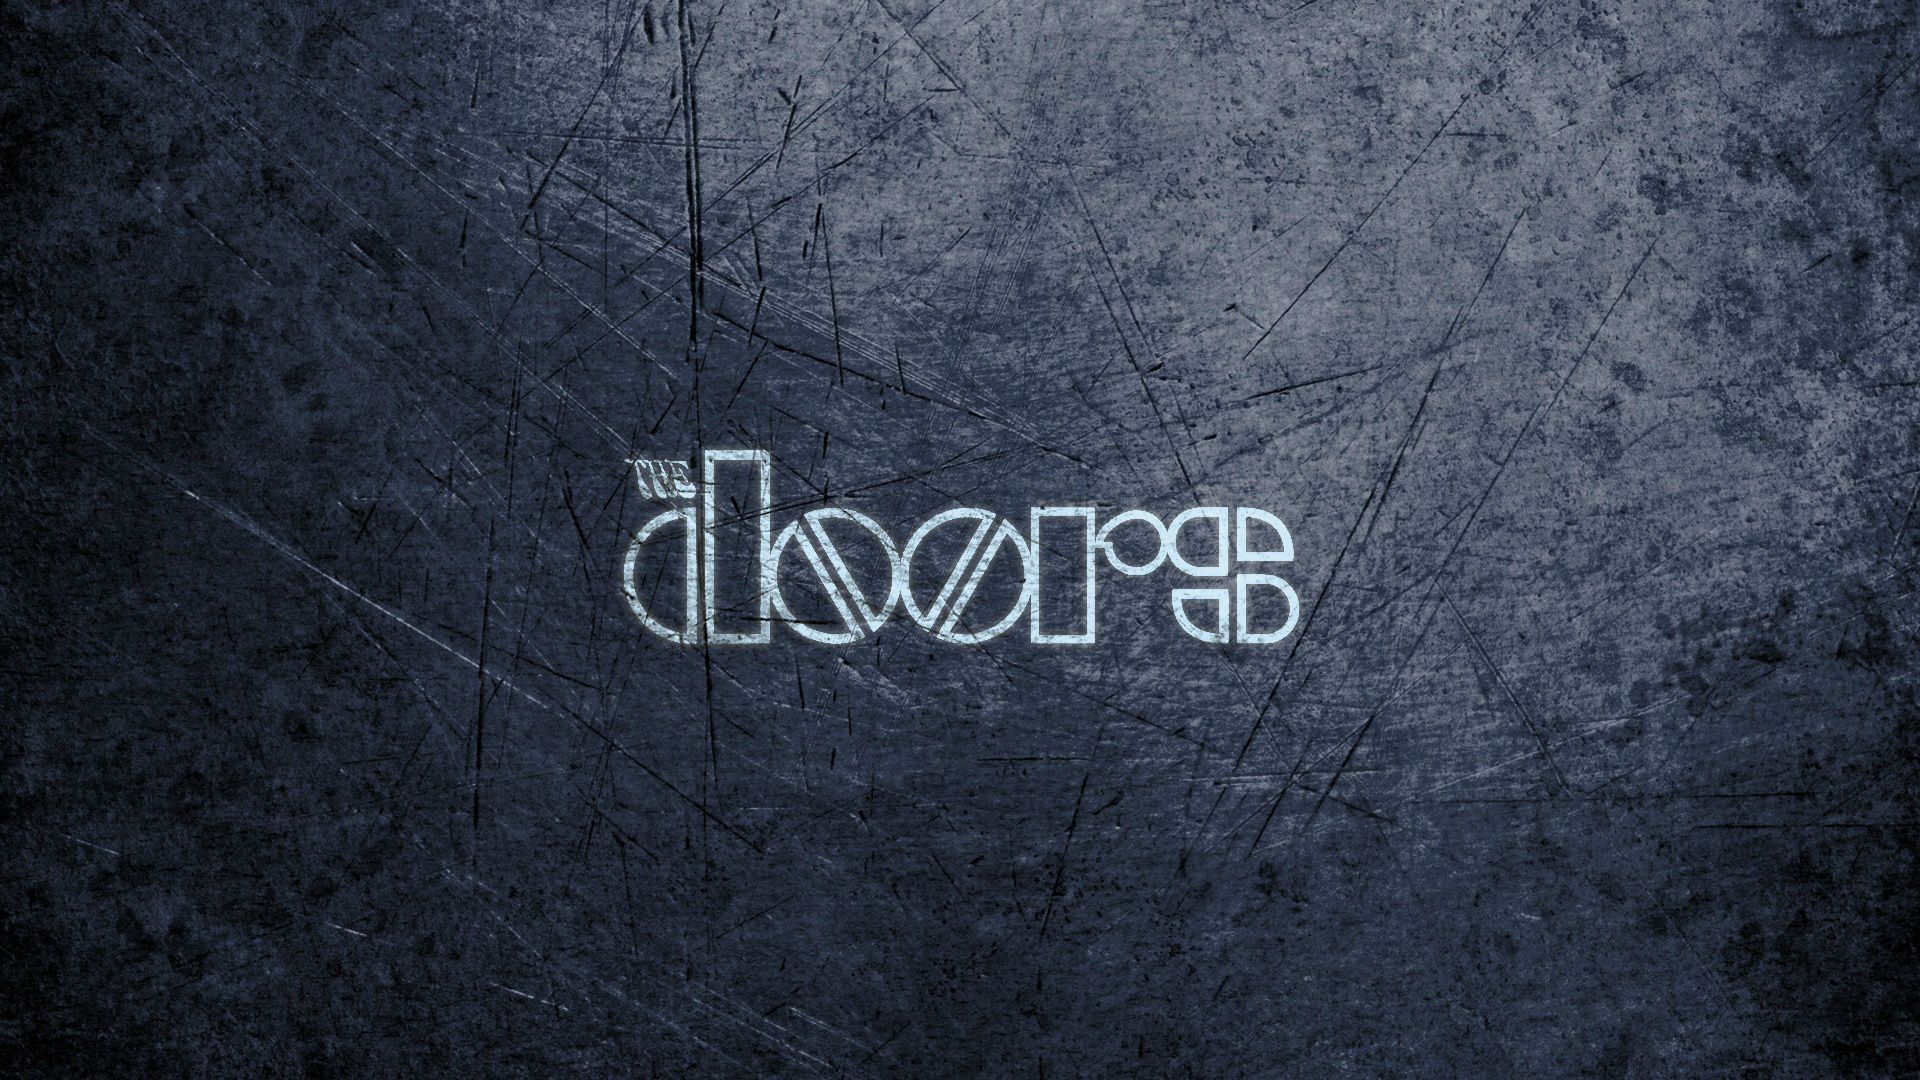 The Doors Band Image Logo Music Desktop Wallpaper Picture For